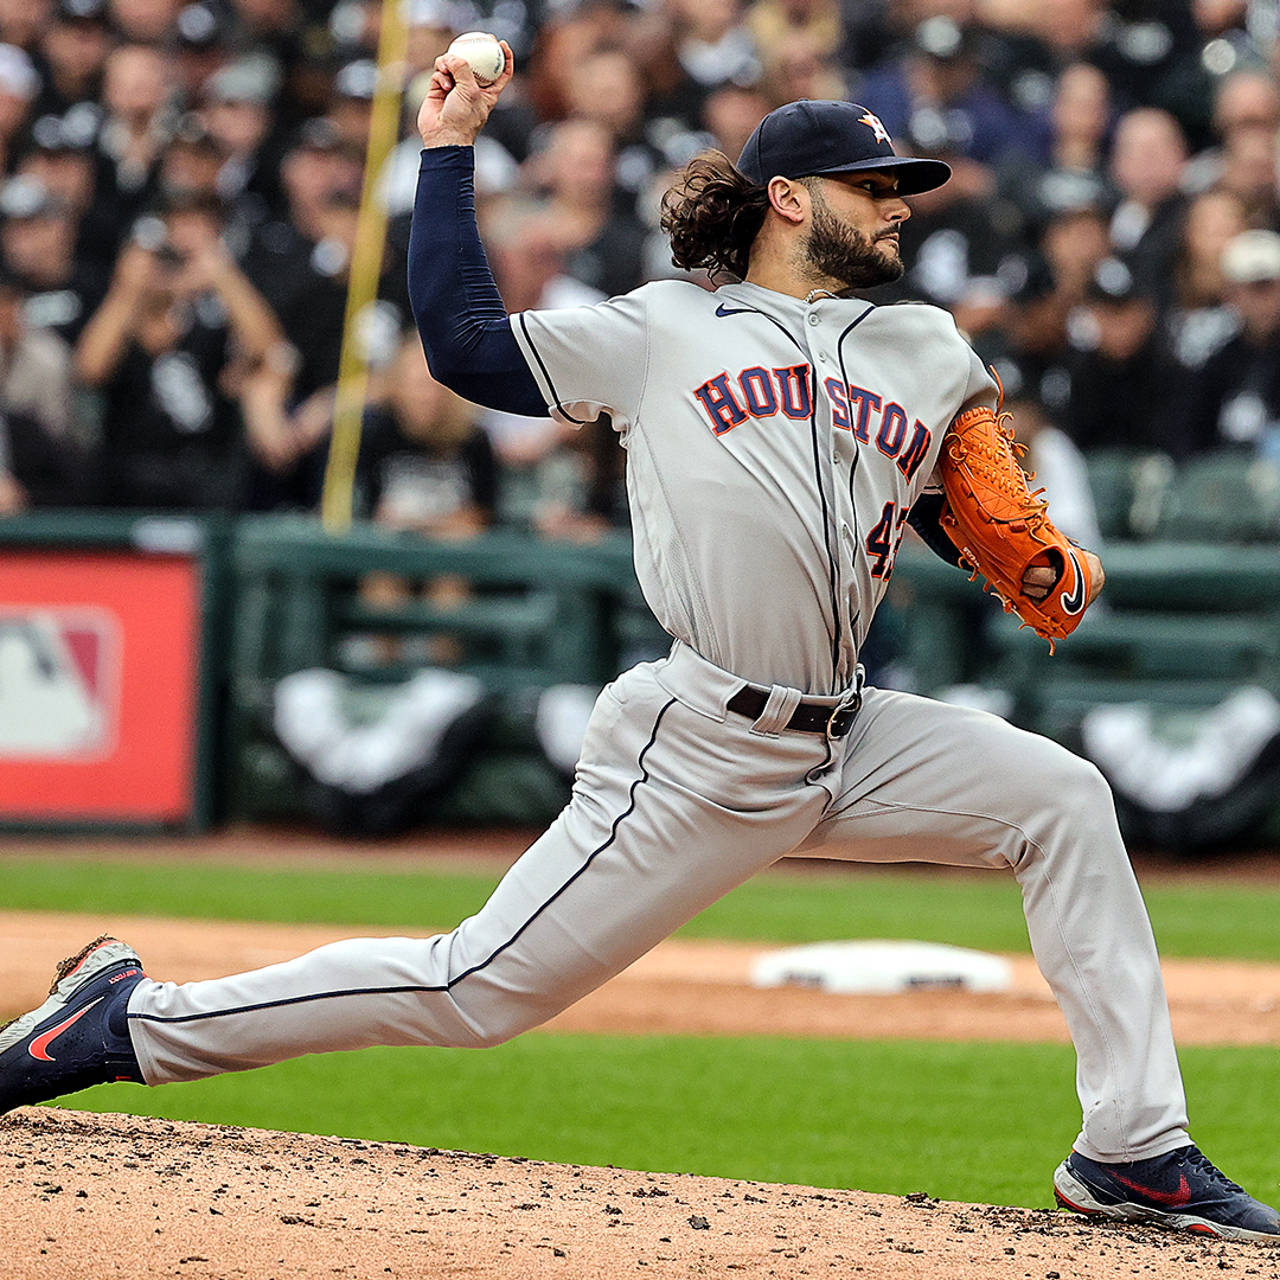 Lancemccullers I Pitcher-form. Wallpaper